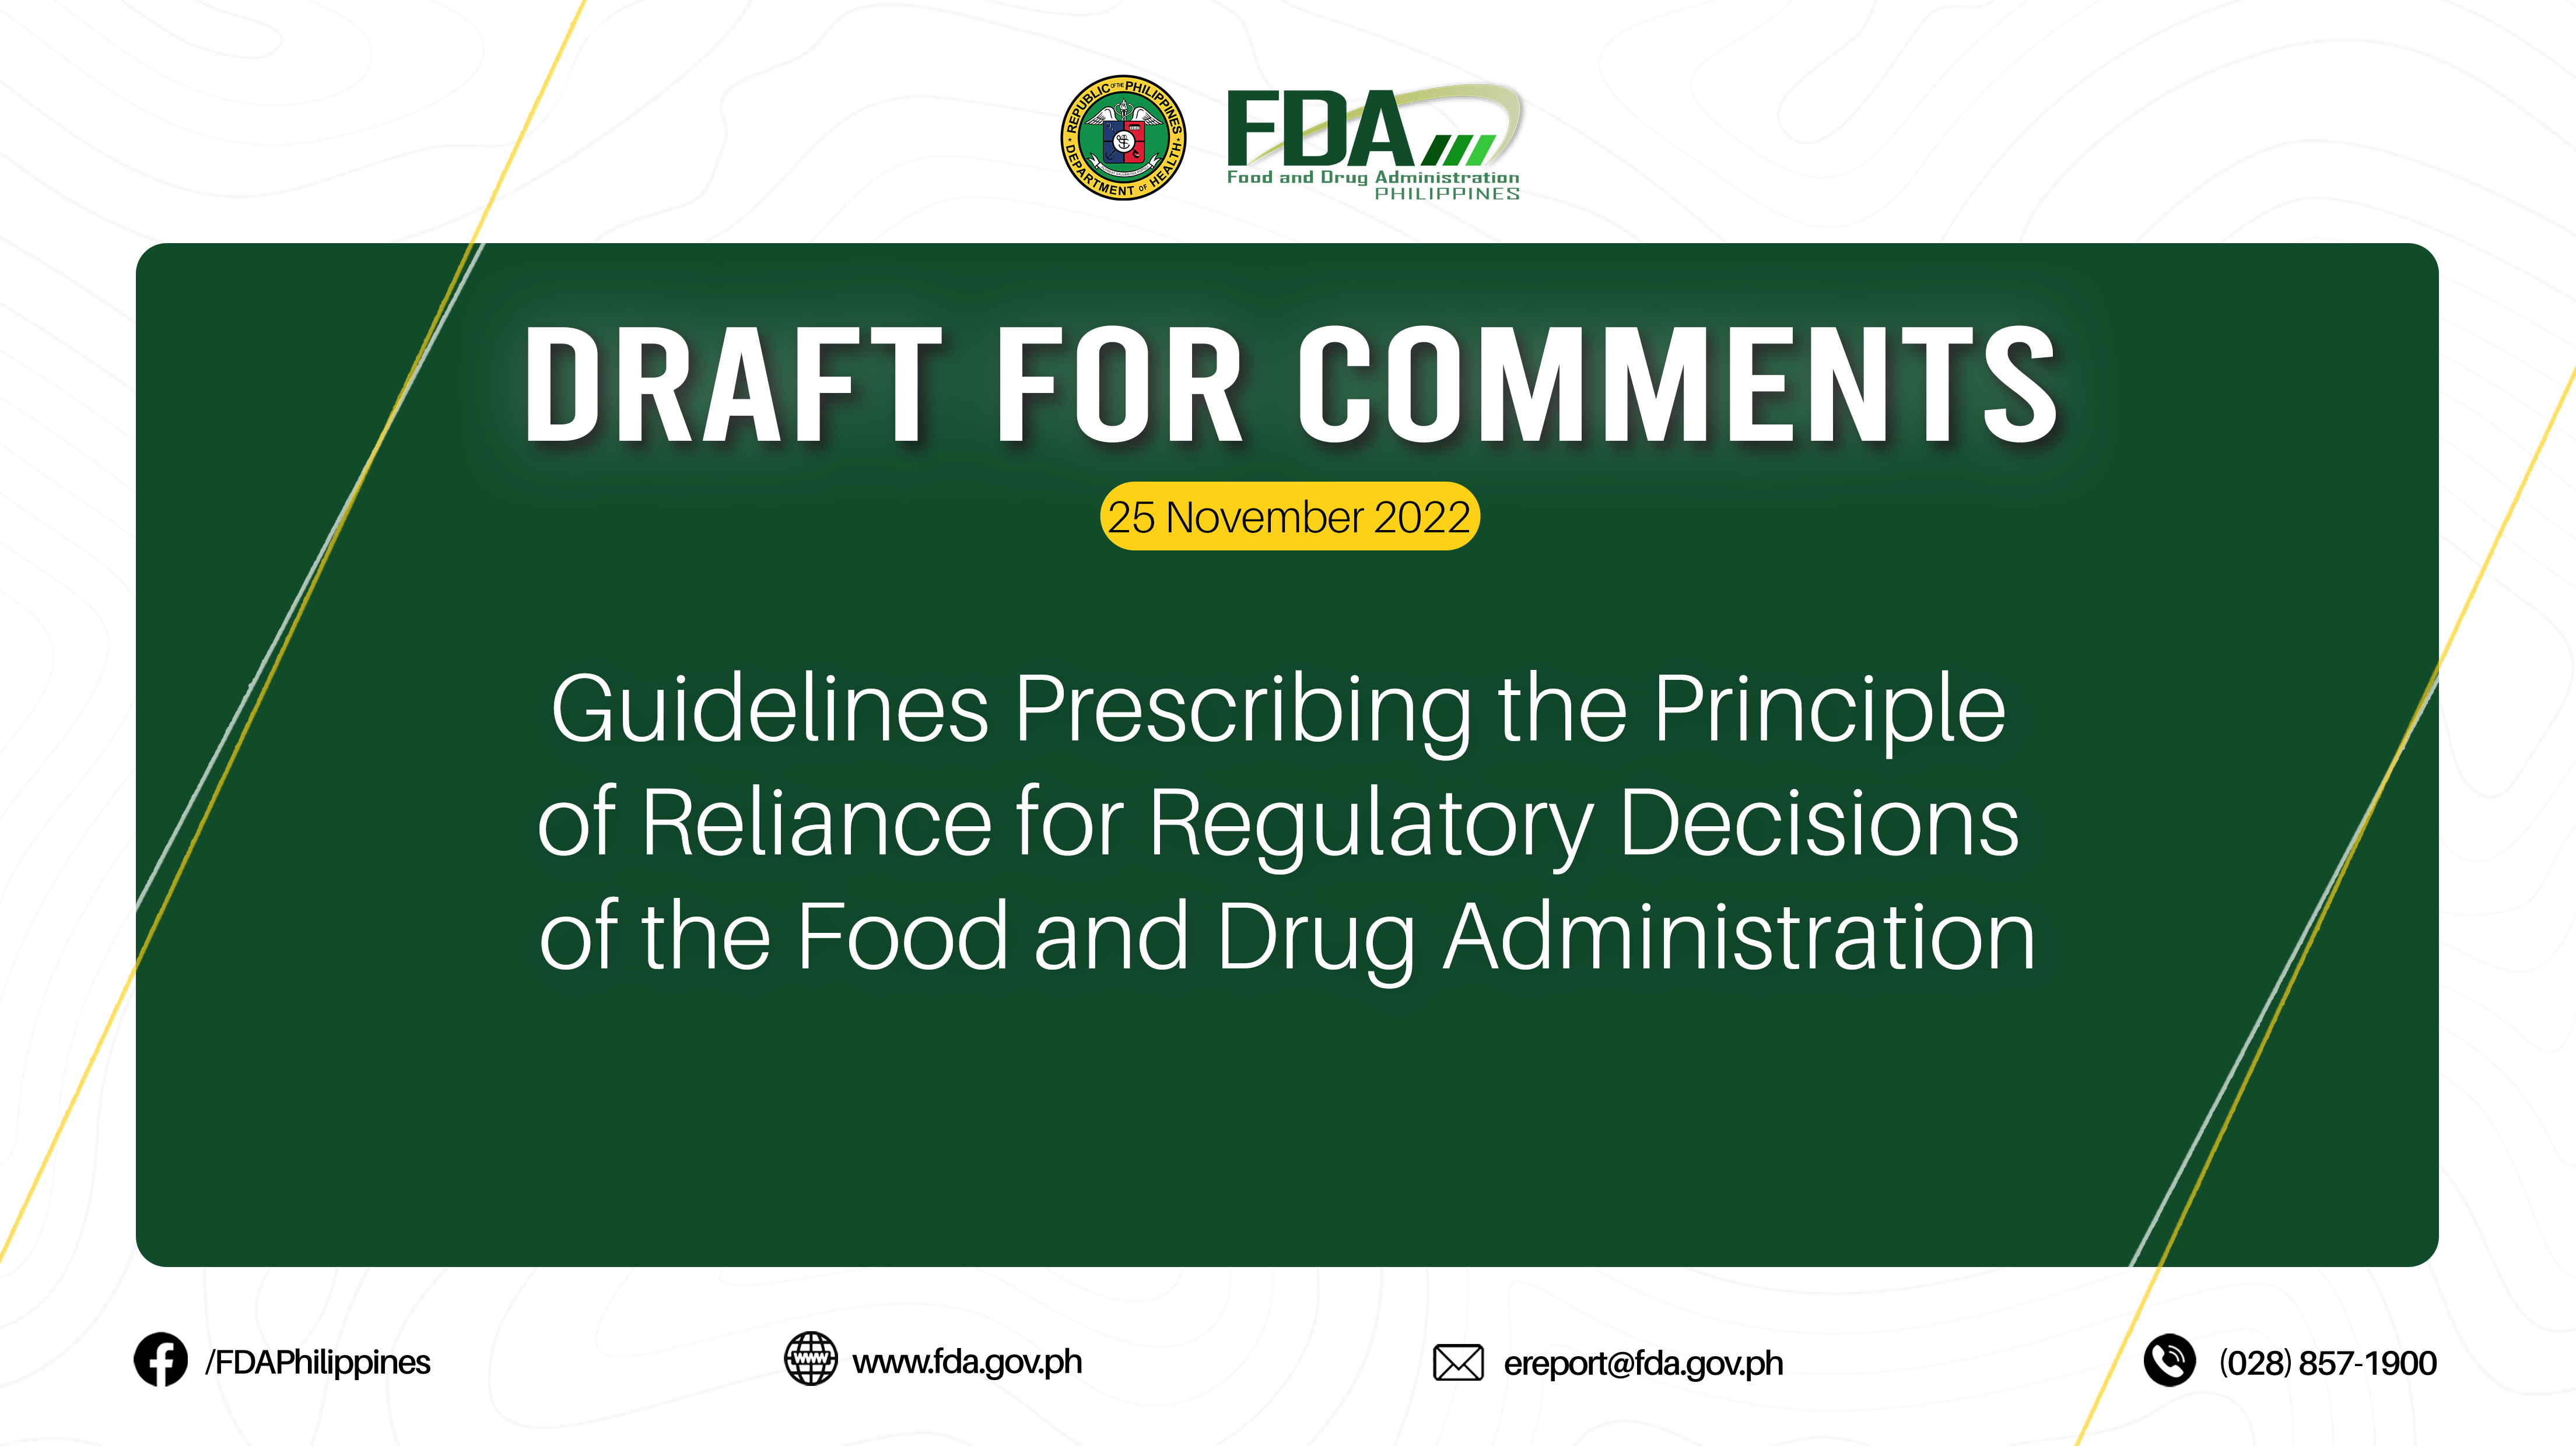 Draft for Comments || Guidelines Prescribing the Principle of Reliance for Regulatory Decisions of the Food and Drug Administration